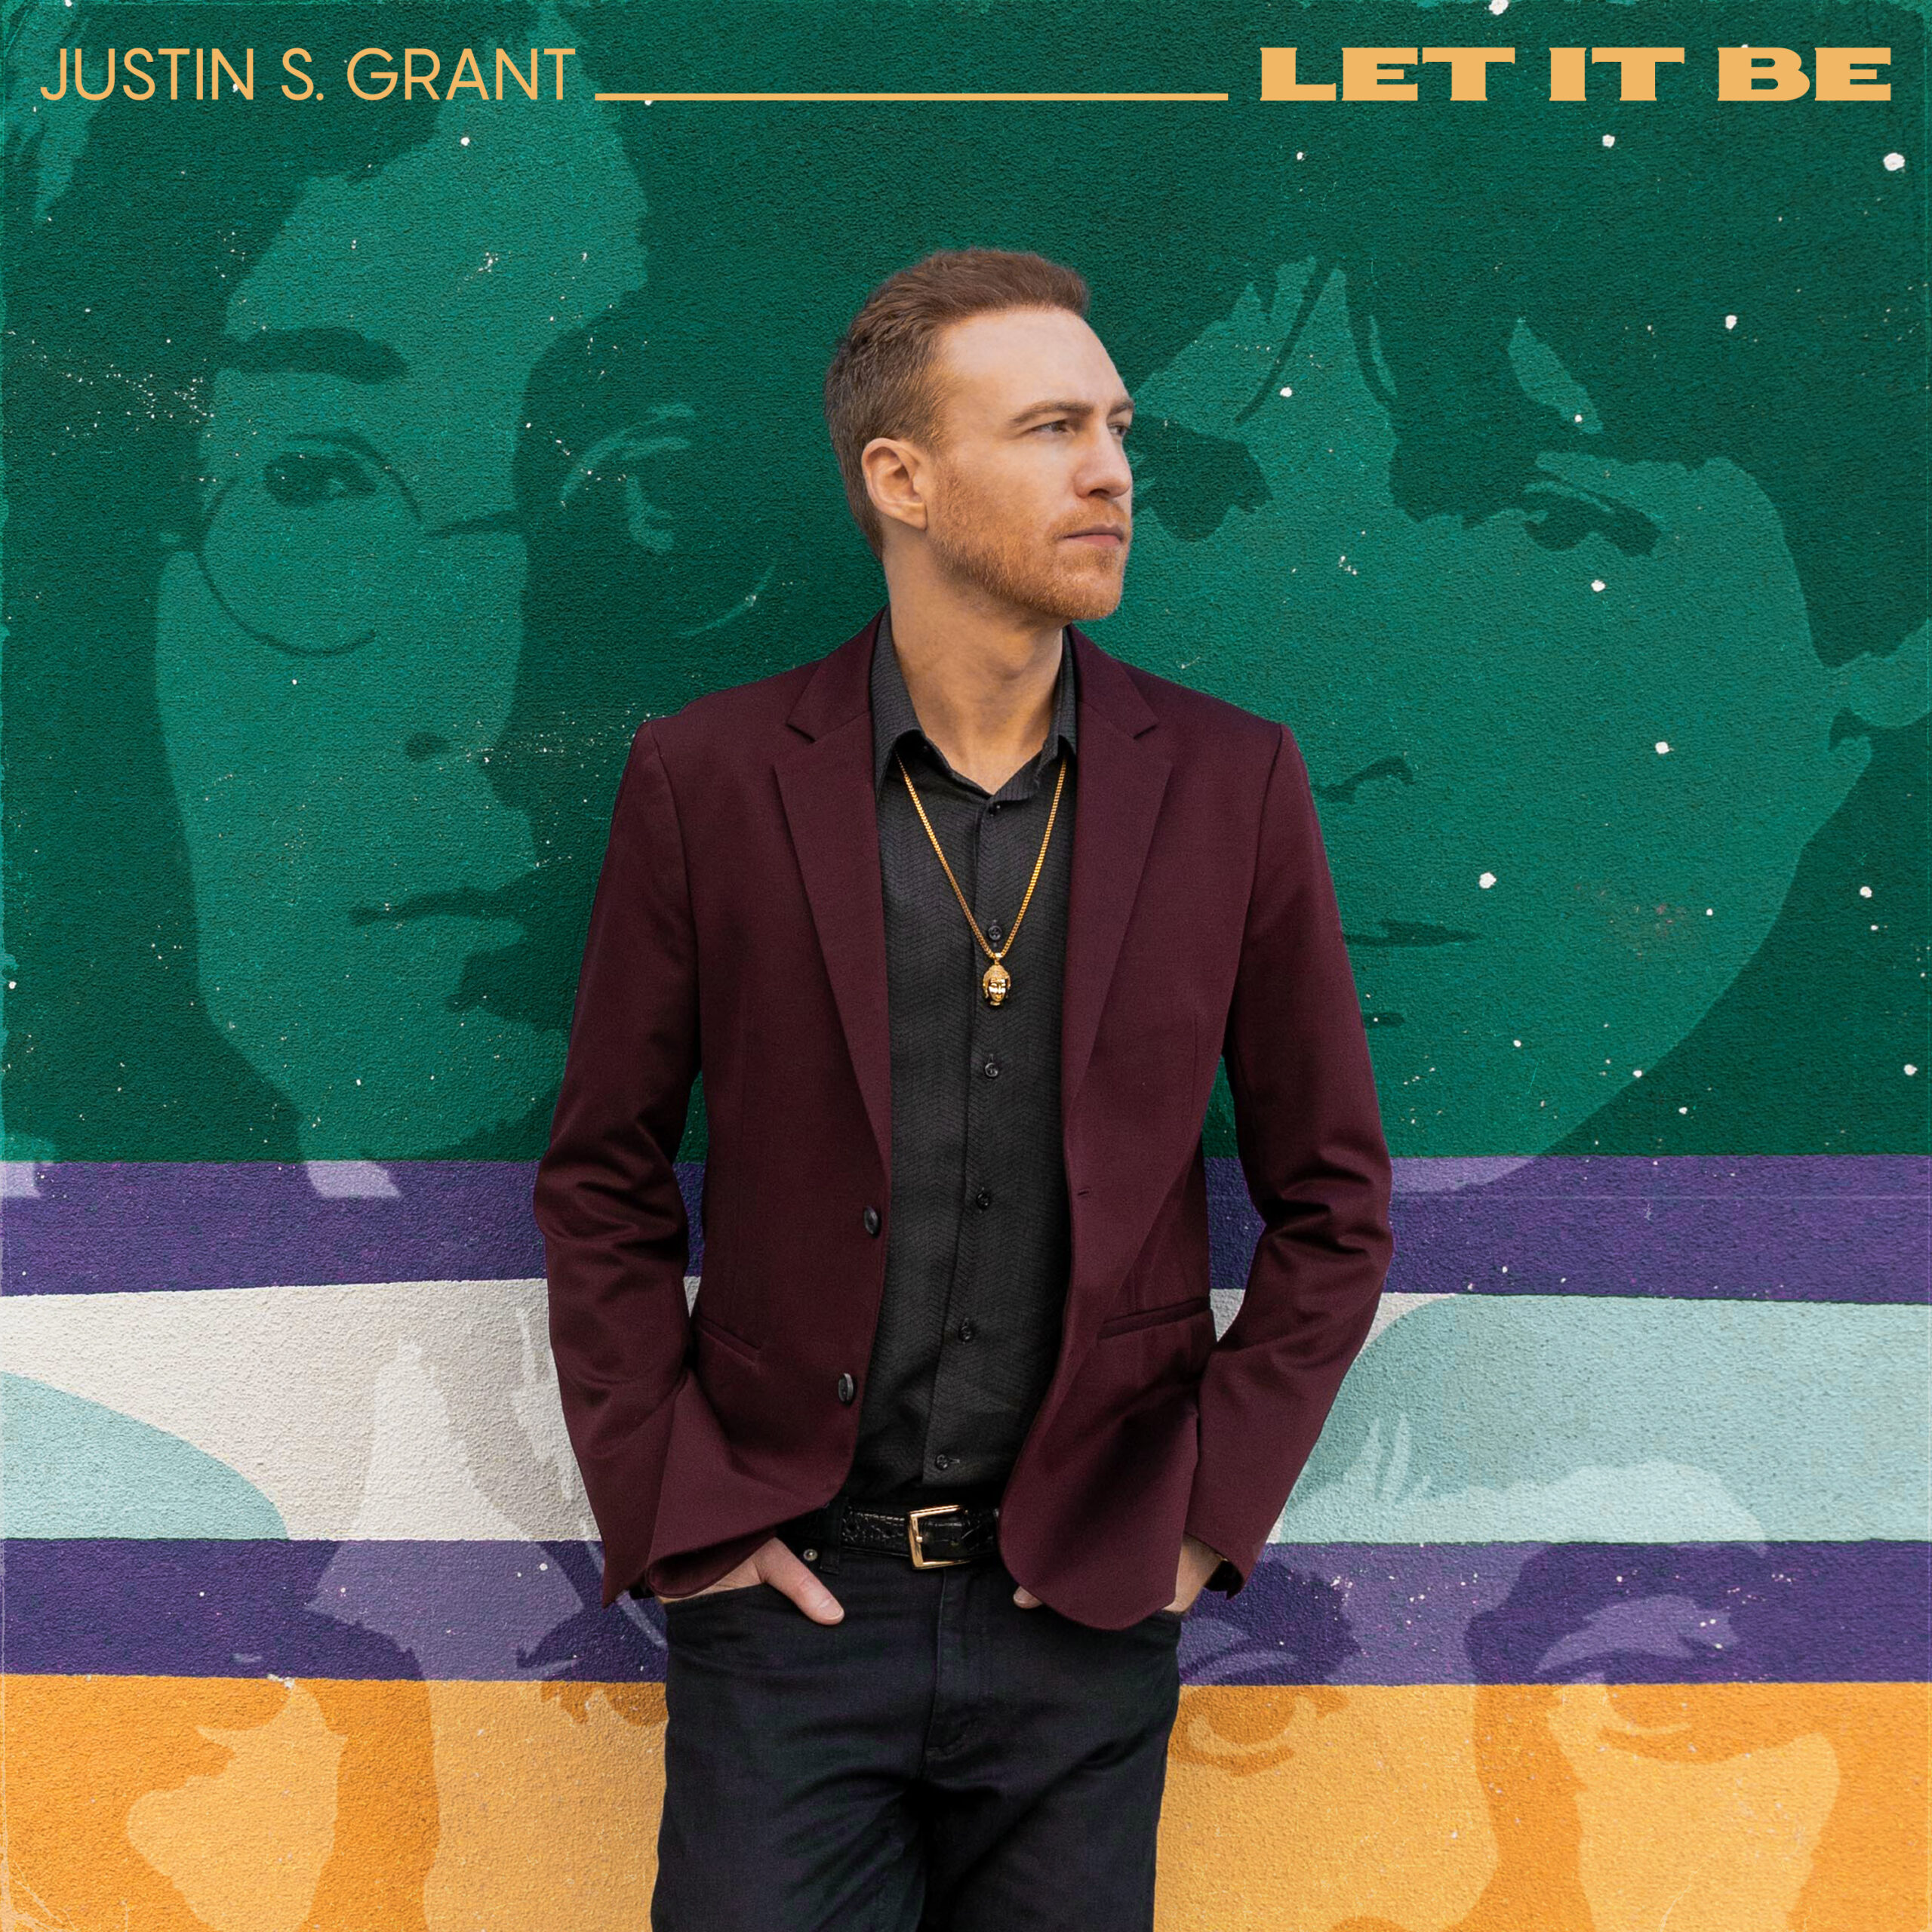 Justin S. Grant Returns With New Cover Of The Beatles’ “Let It Be”